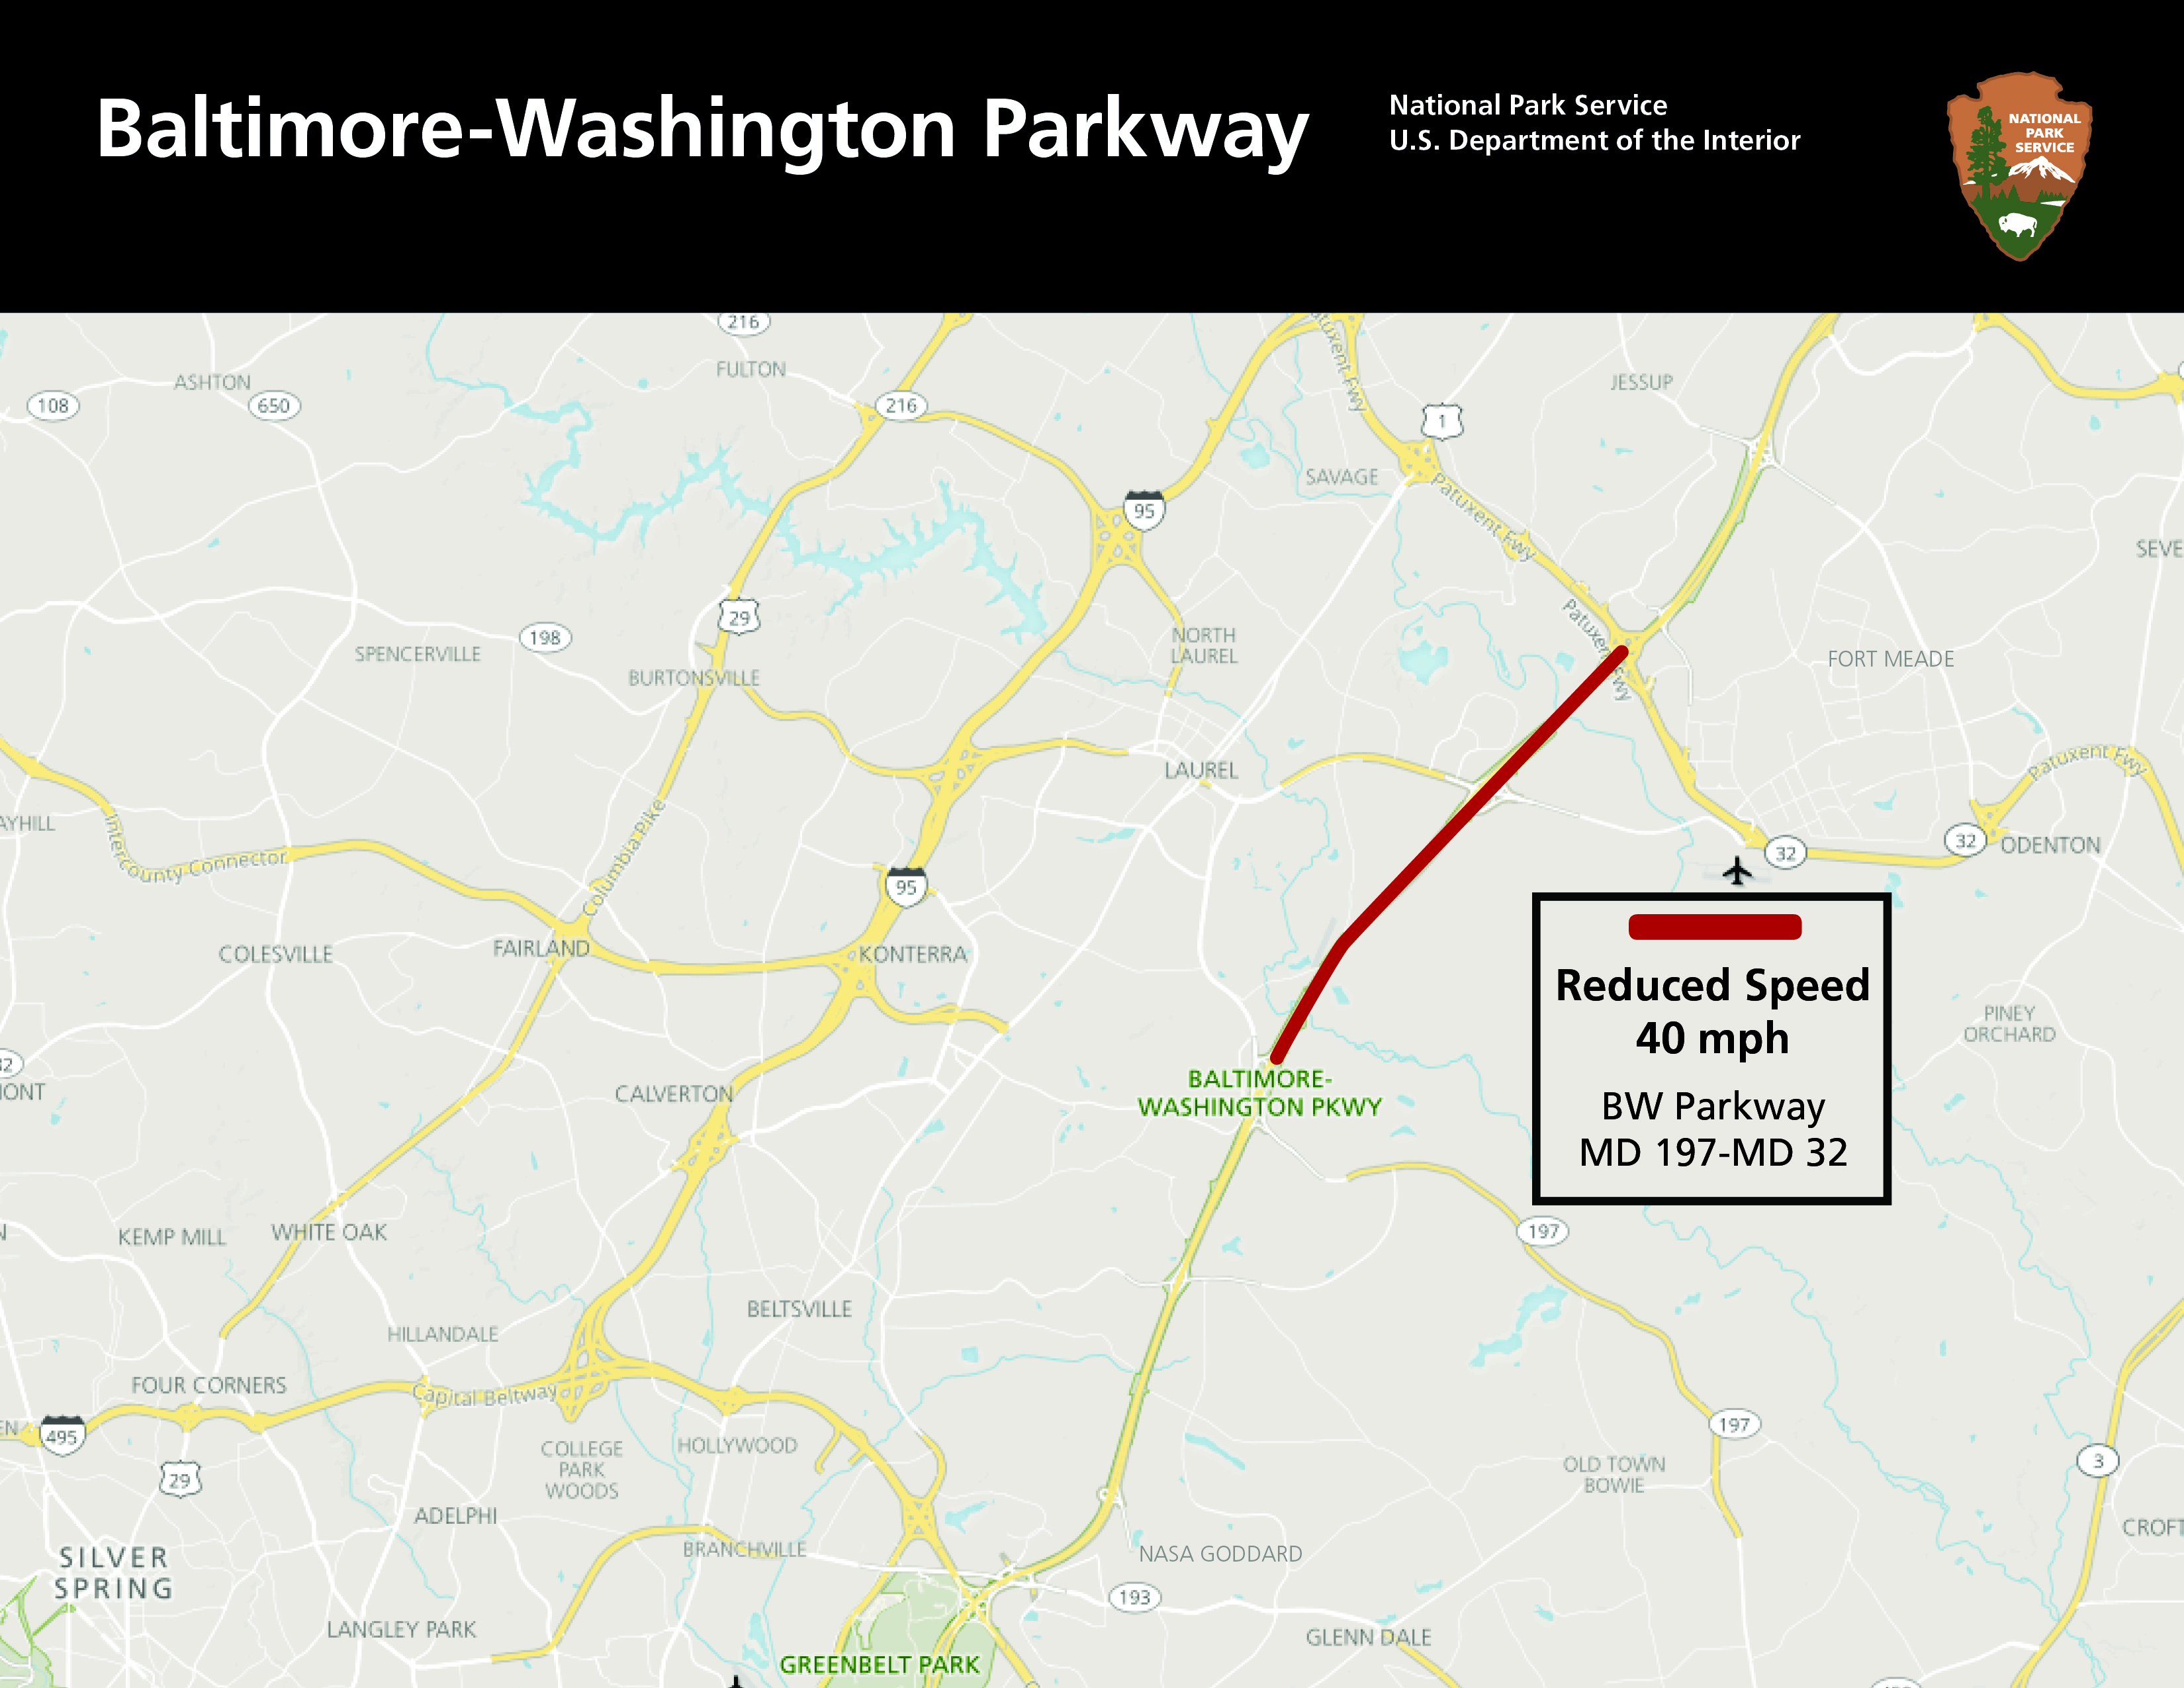 Map of Baltimore-Washington Parkway northeast of Washington, DC showing area with reduced speed limit between MD 32 and MD 197.